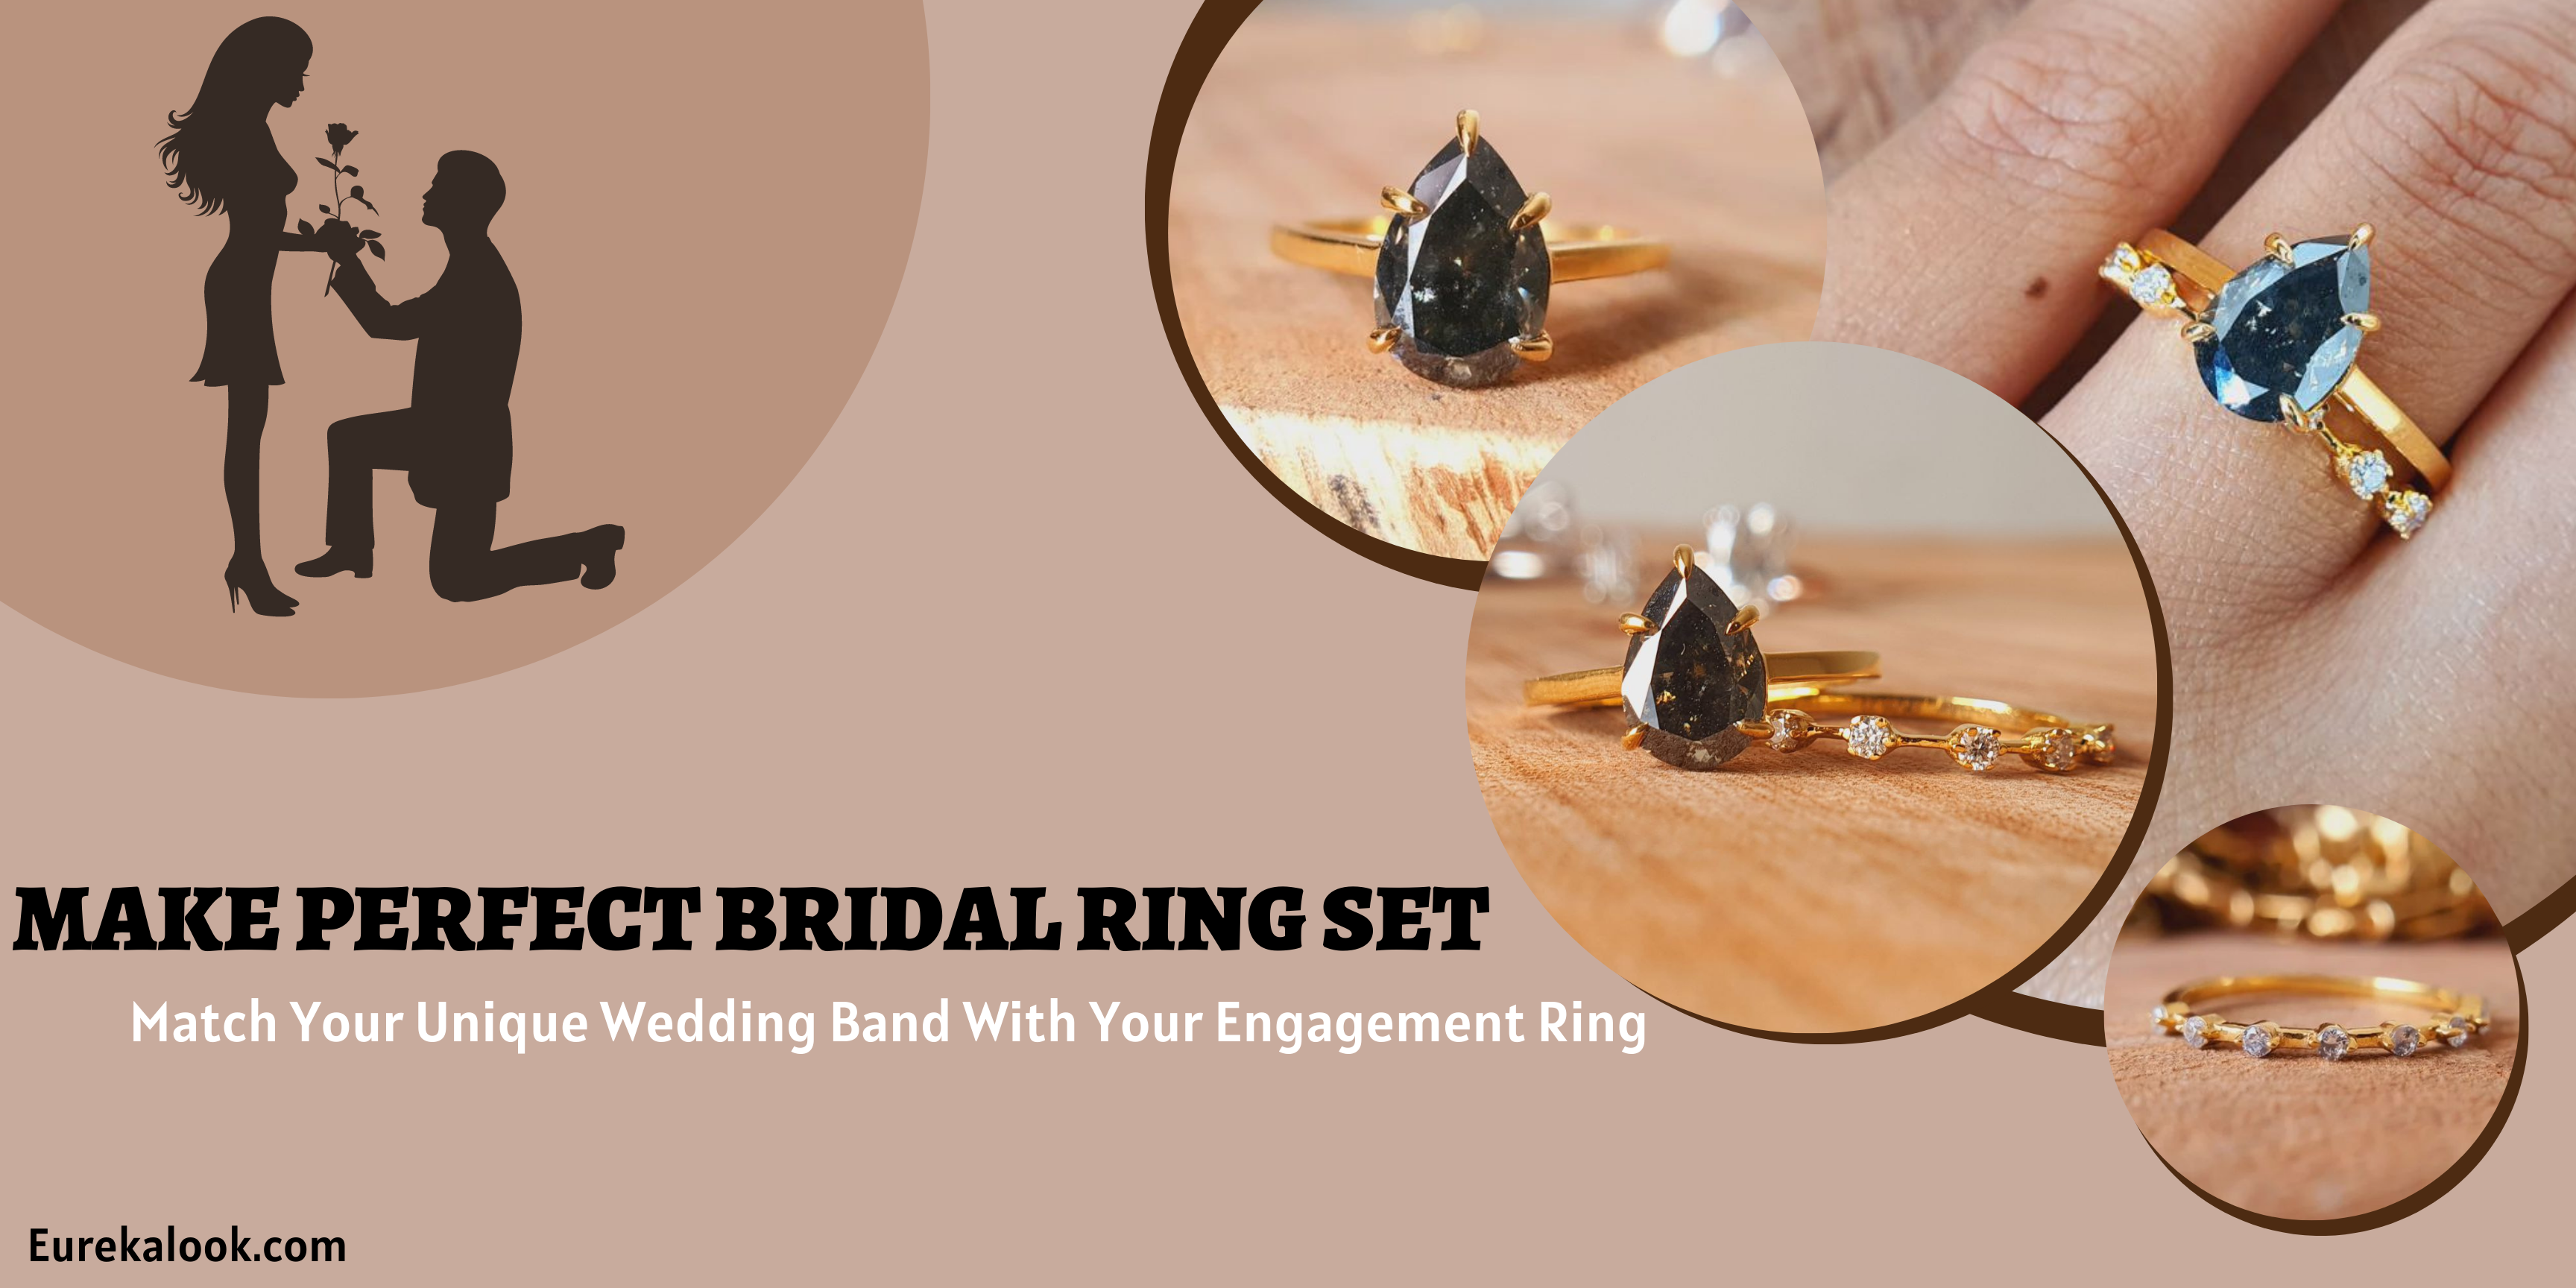 Match Your Unique Wedding Band With Your Engagement Ring : Make Perfect Bridal Ring Set